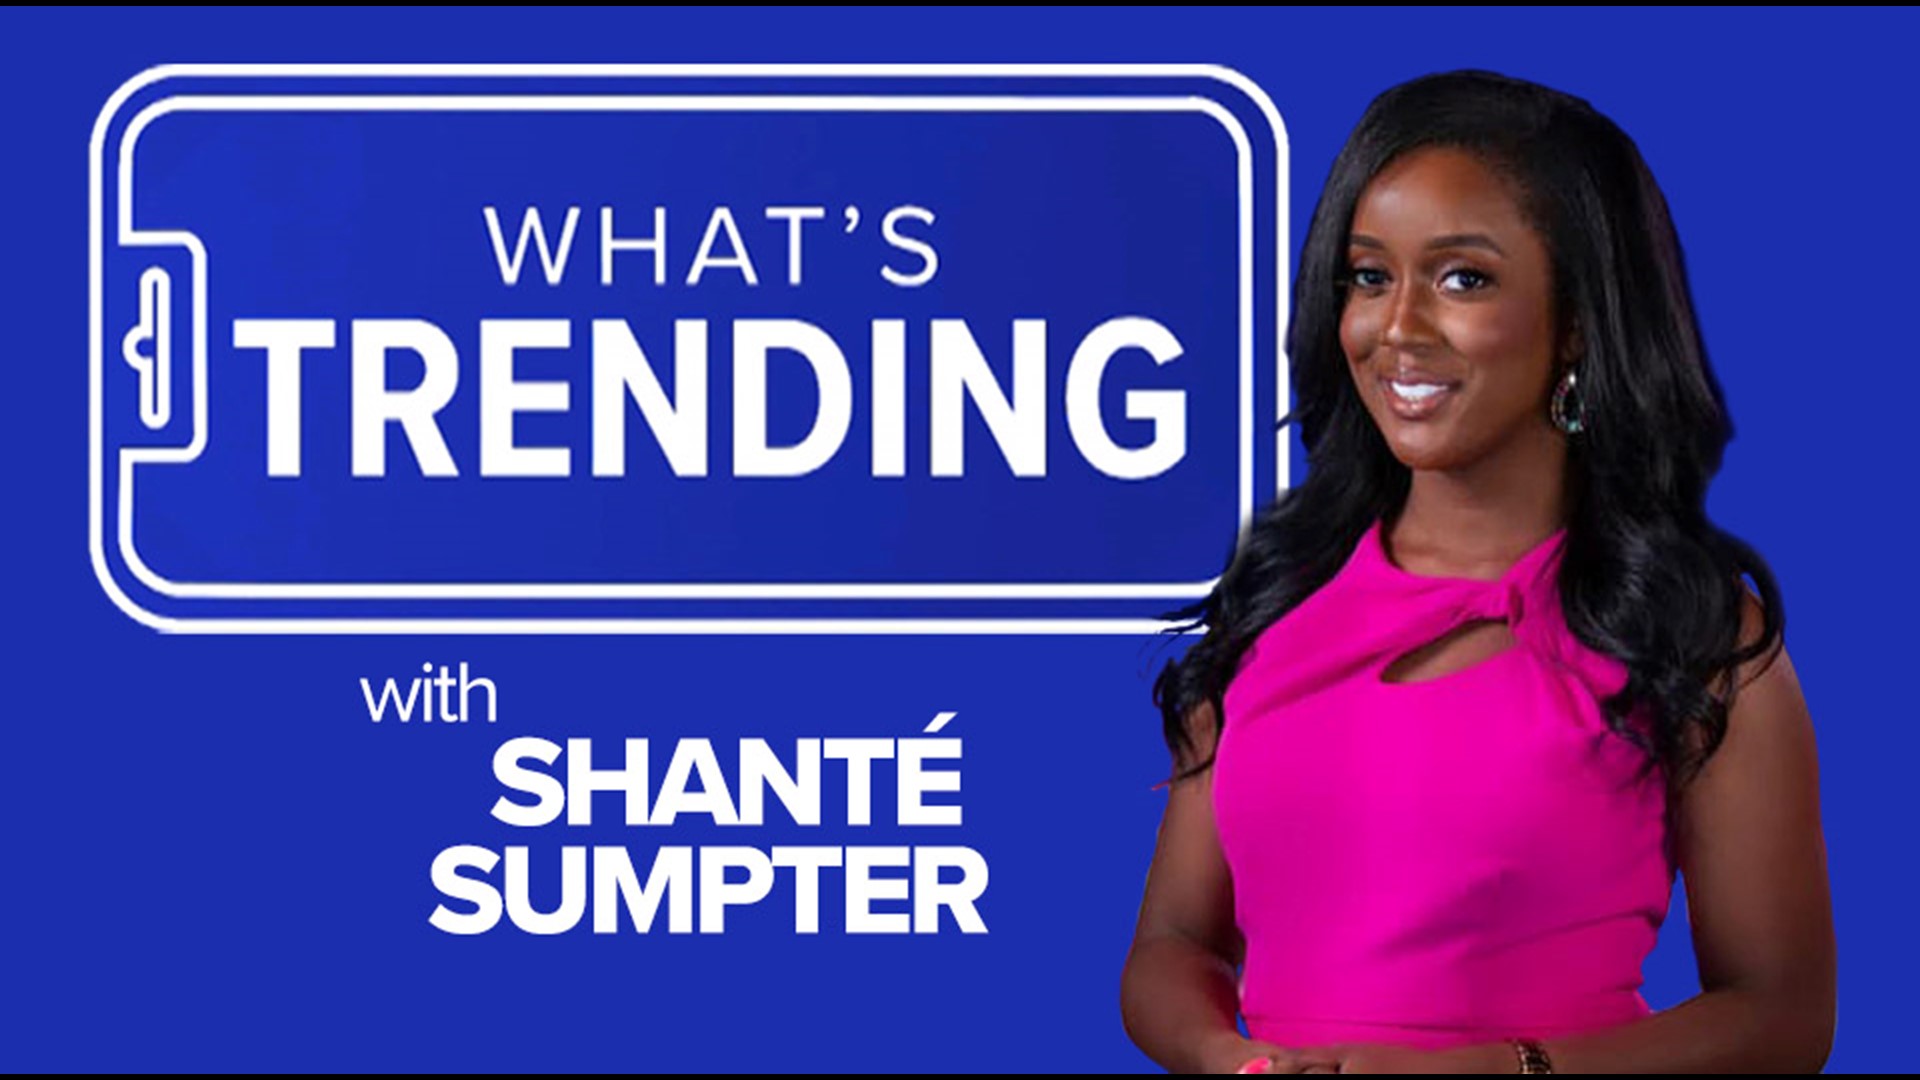 Nobody's using Bing, it's National Taco Day and candy corn makes its return. Shante Sumpter has our trending topics for October 4th.